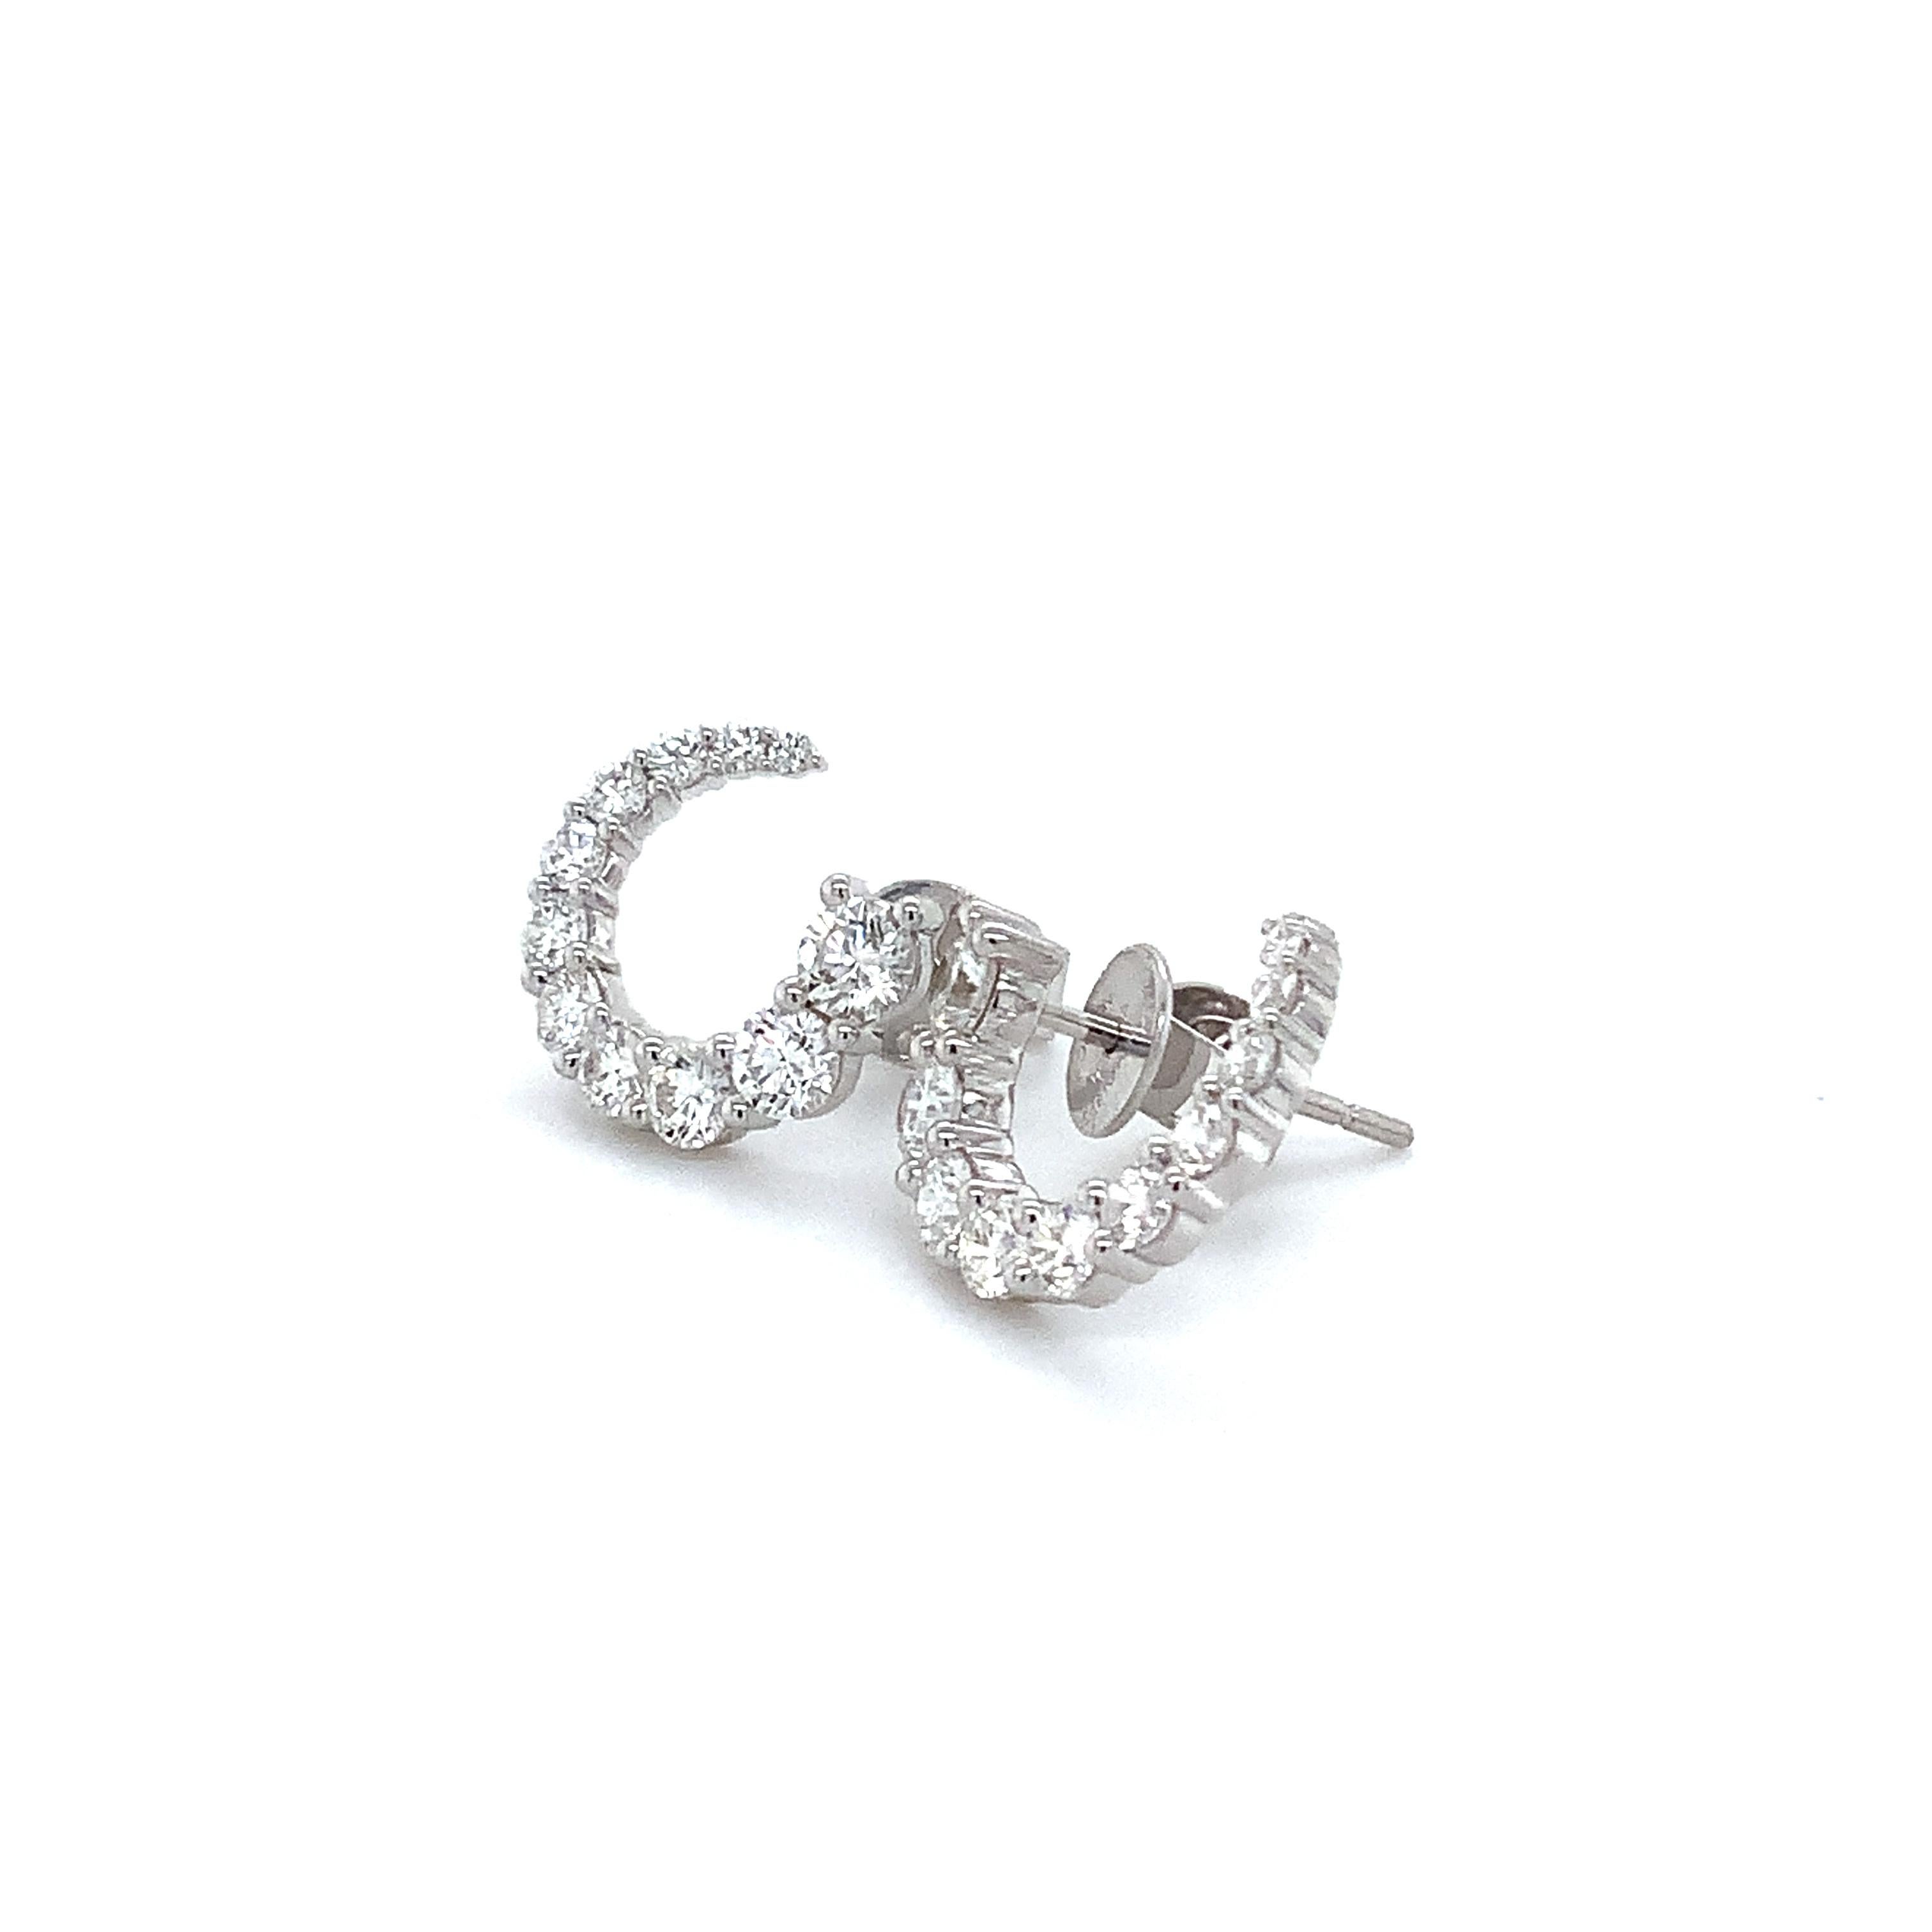 Memoire Luna Wrap Collection Diamond Earring in 18 Karat White Gold 1.30cts T.W In New Condition For Sale In Los Gatos, CA